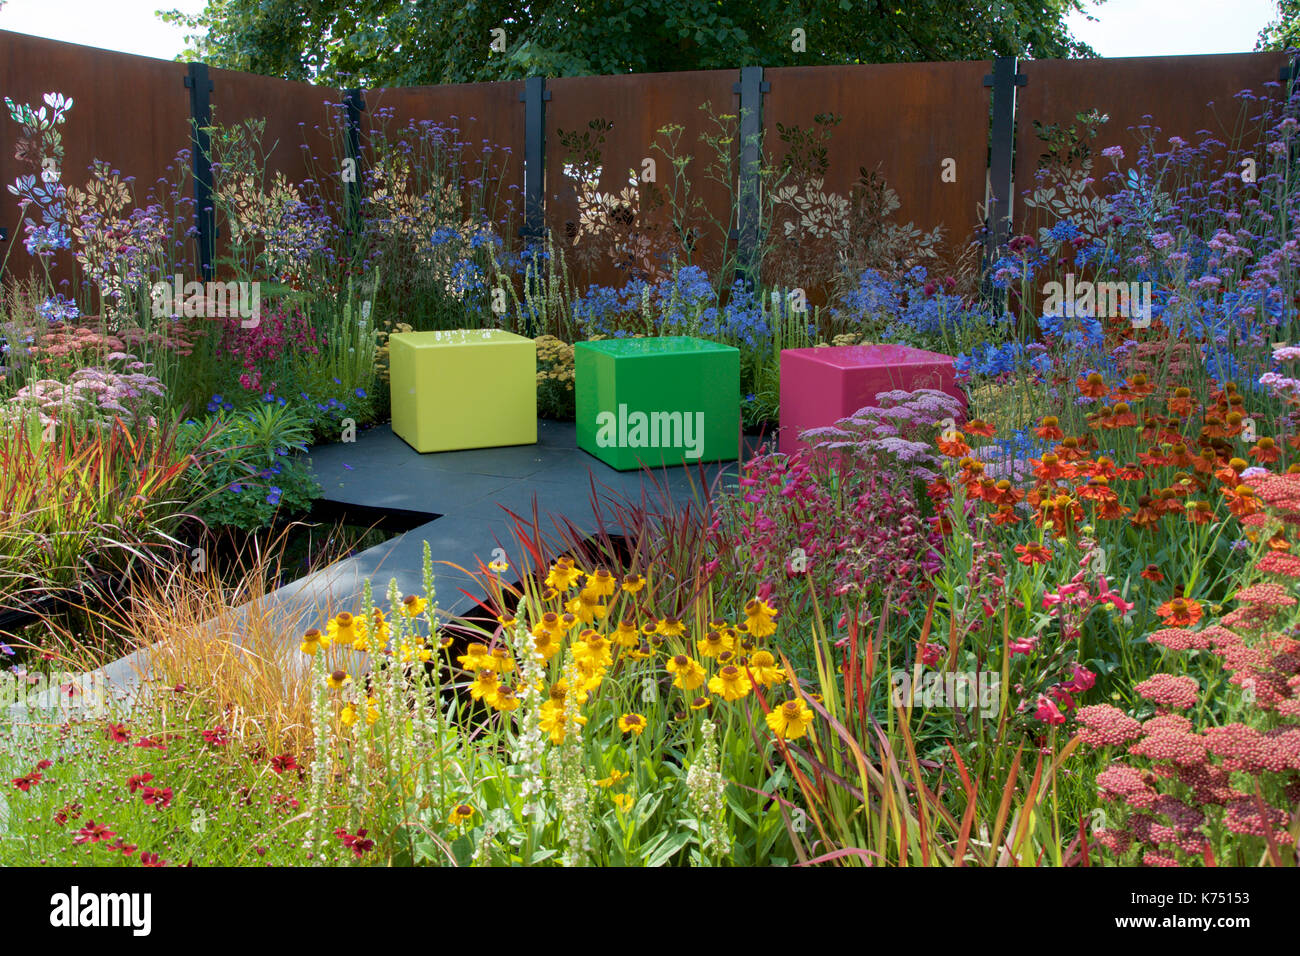 The Colour Box garden at RHS Hampton Court Place Flower Show. The garden was designed by Charlie Bloom and Simon Webster. Stock Photo